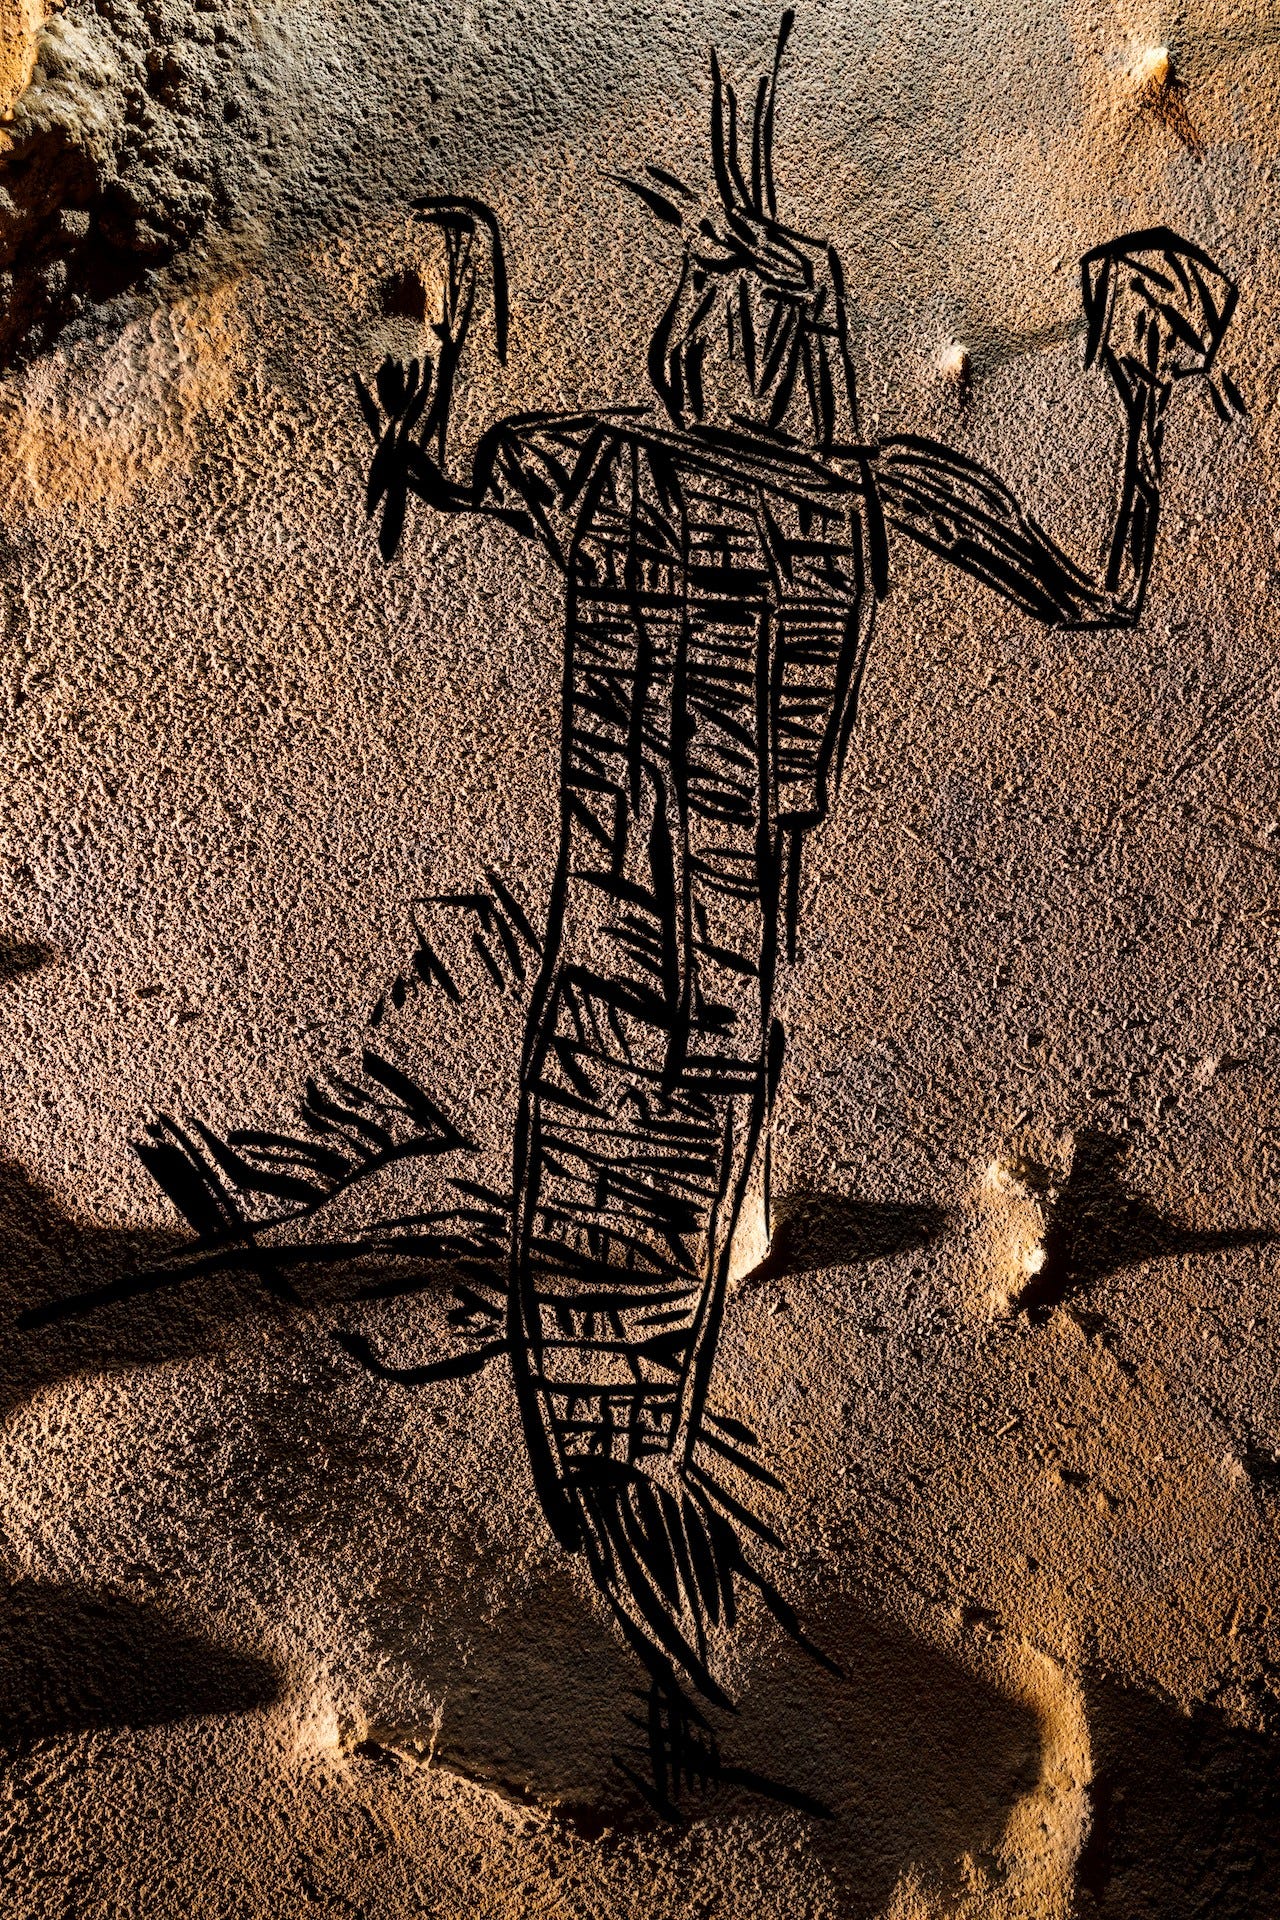 Scientists use 3D technology to uncover largest collection of ancient Native American cave art